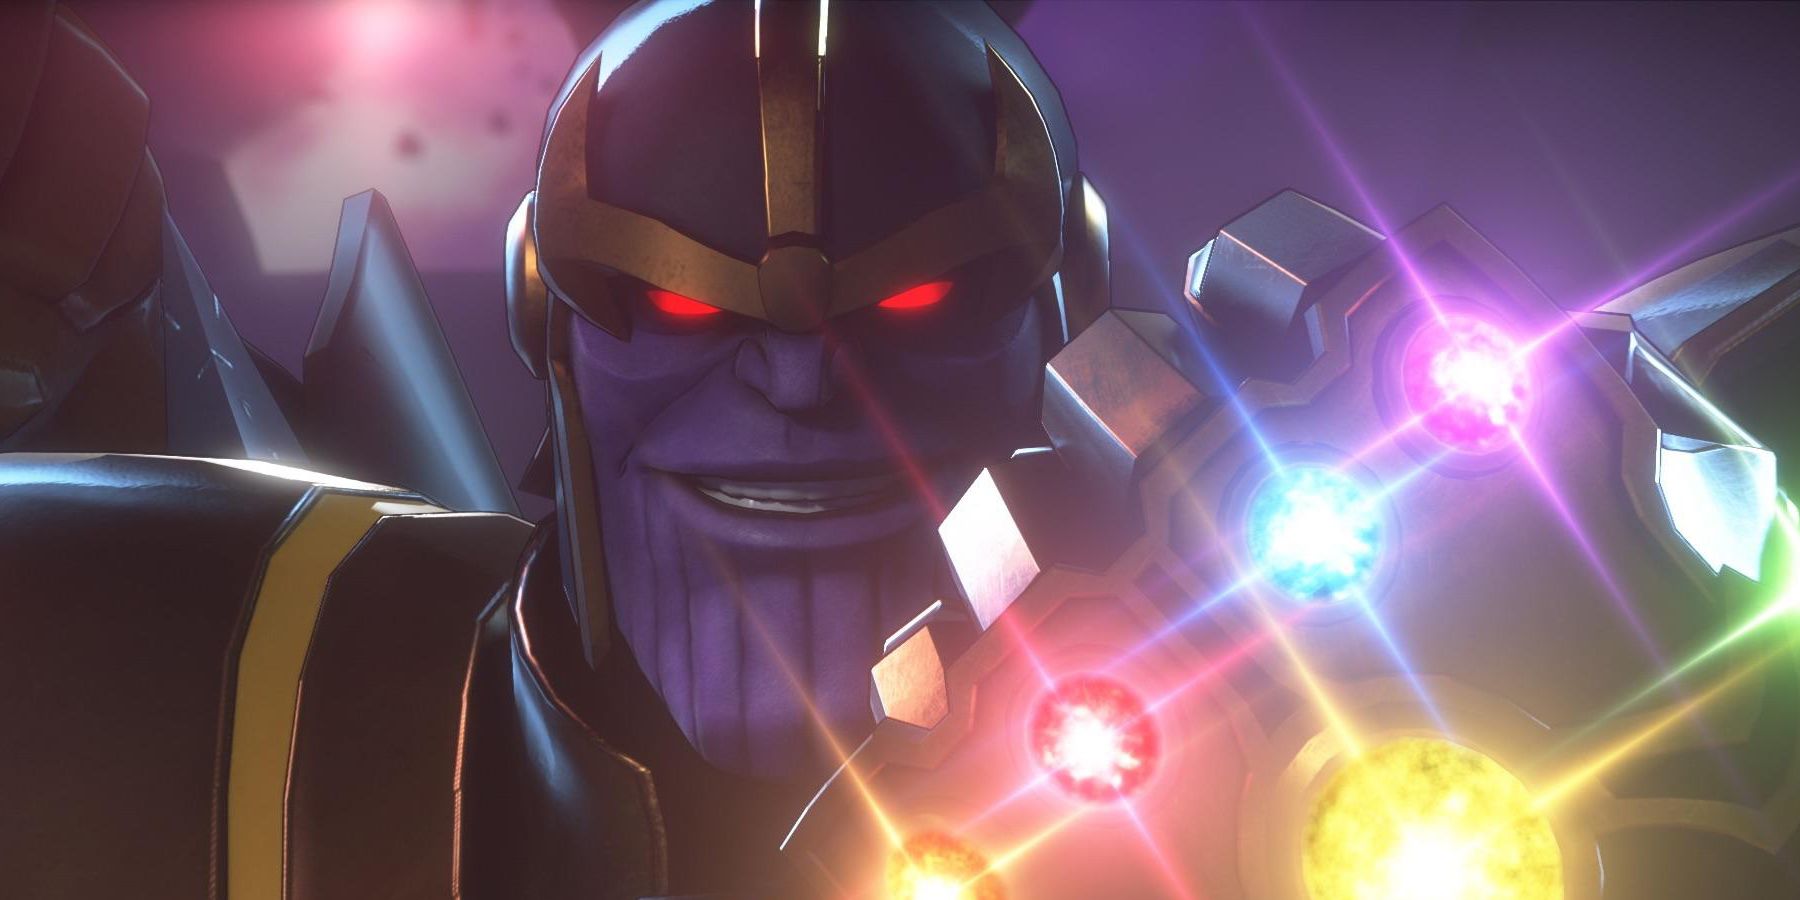 Thanos wielding the Infinity Gauntlet in Marvel Ultimate Alliance